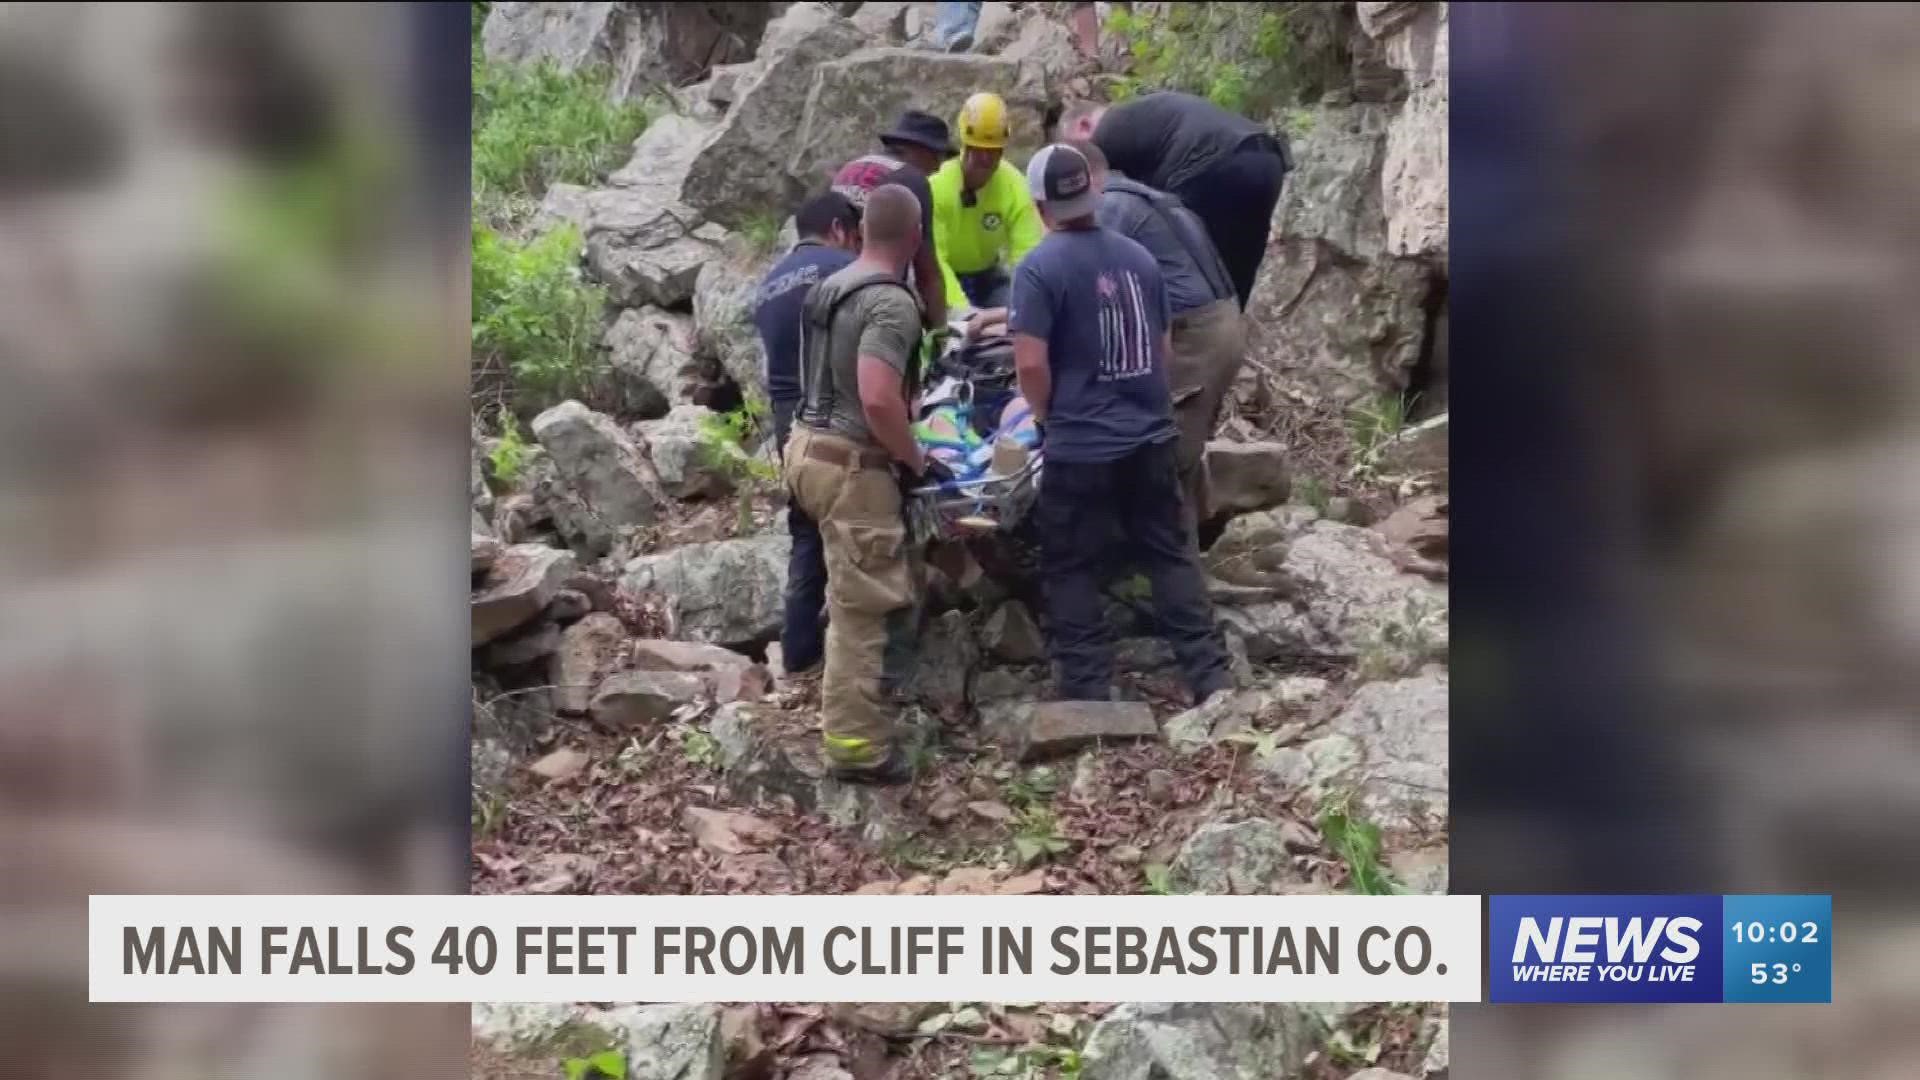 Crews pulled a man up a cliff to safety after he fell down about 40 feet hitting a branch halfway.